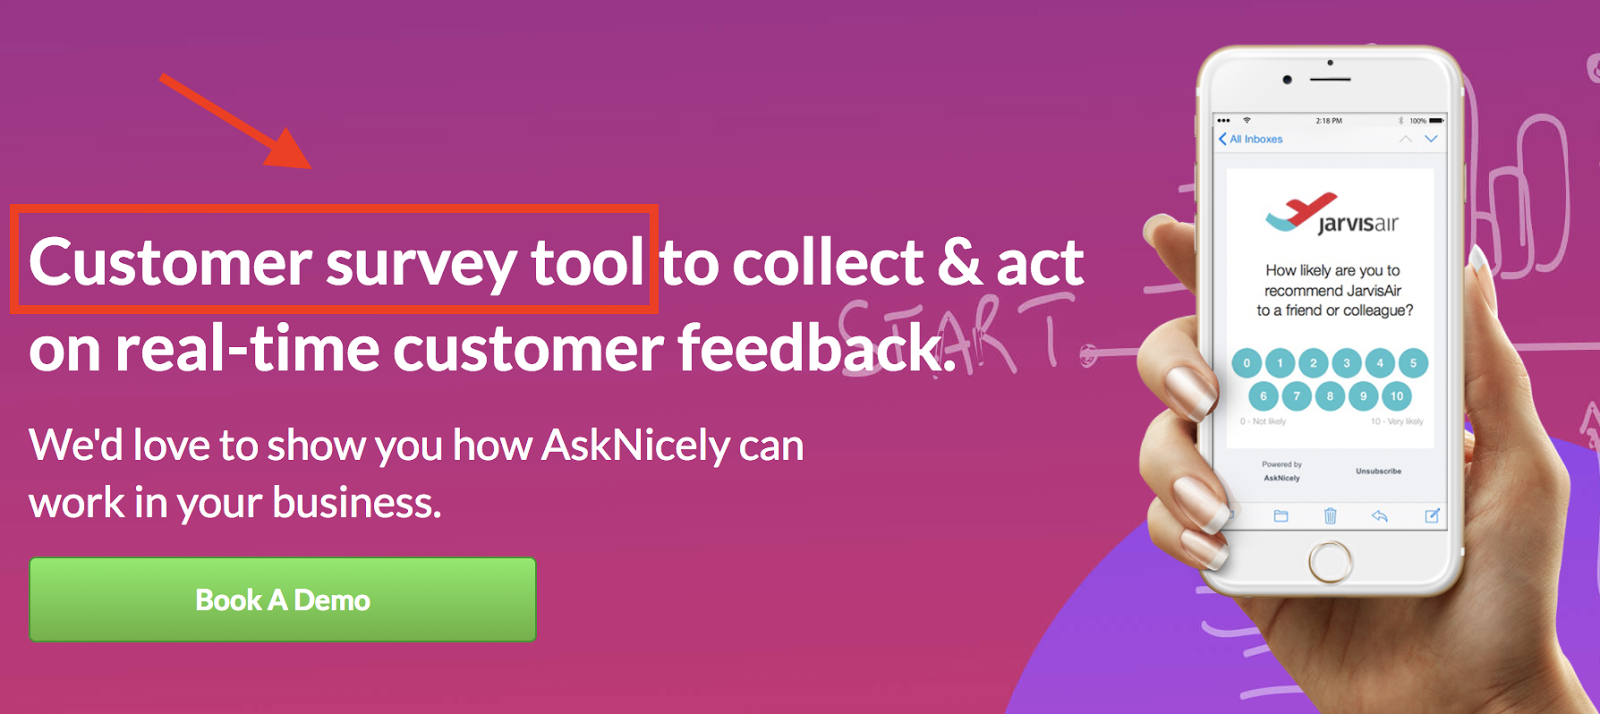 AskNicely customer survey tool landing page